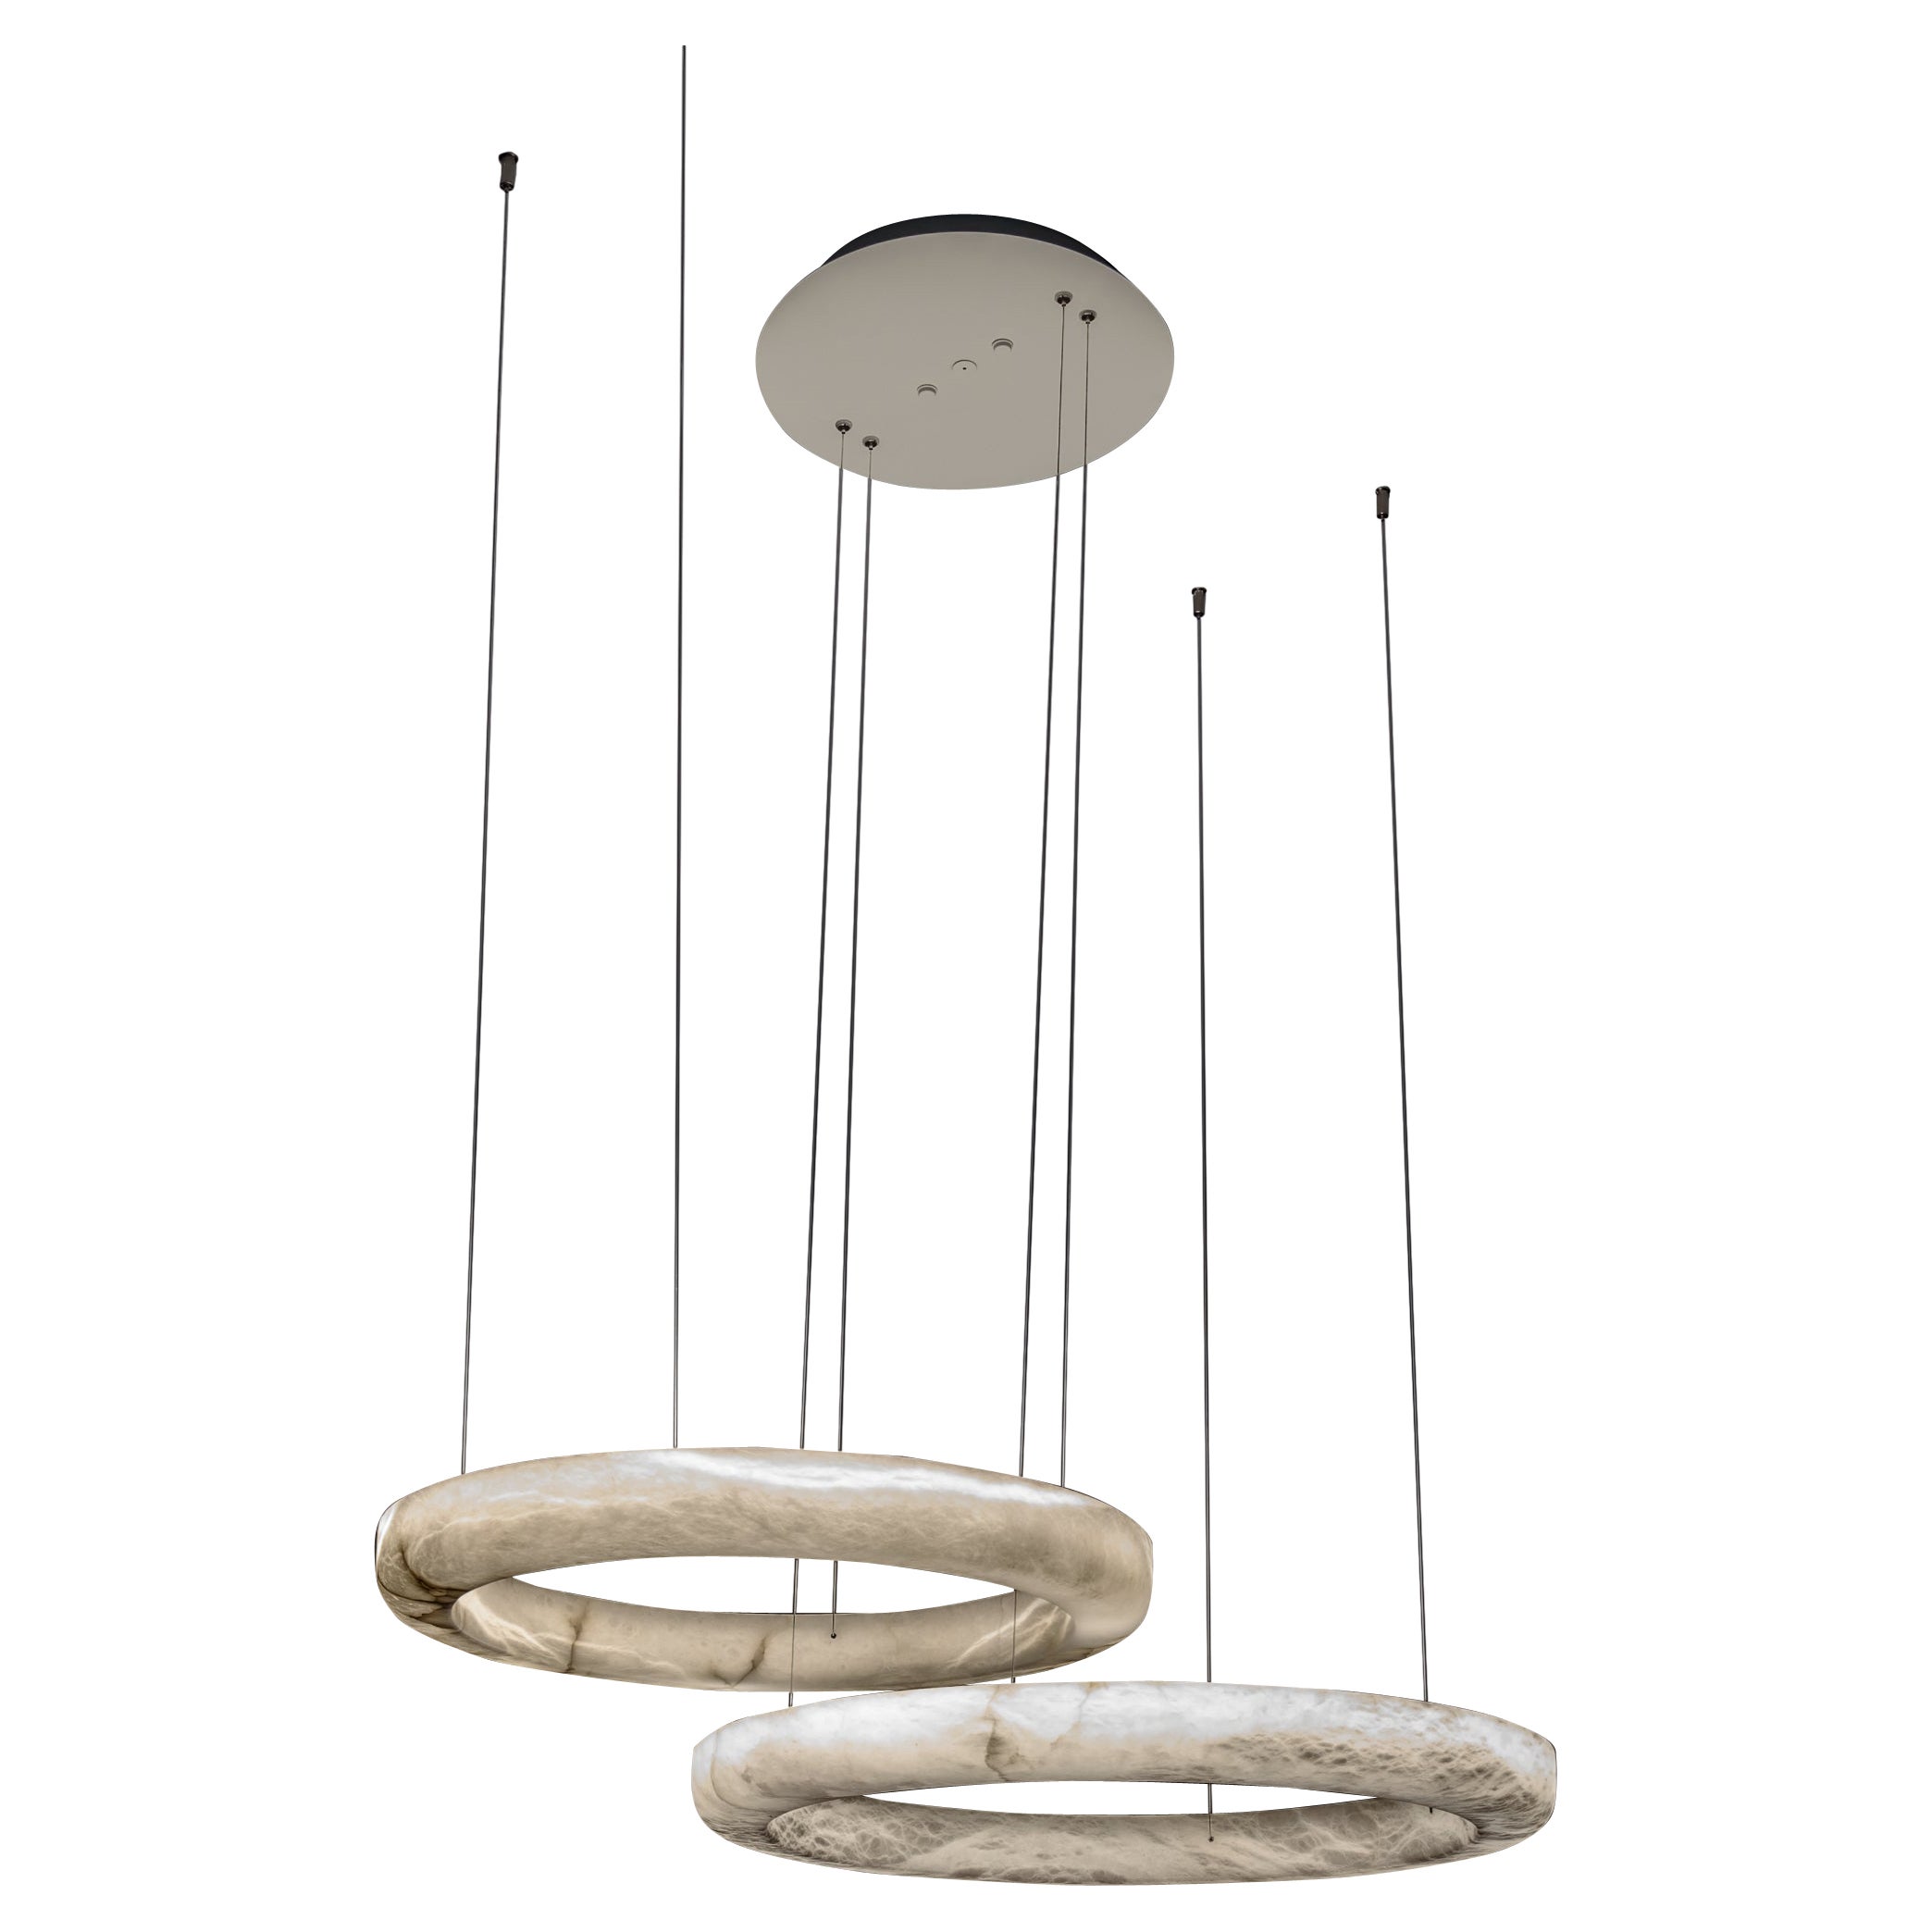 Set of 2 Halos Pendant Lamps by United Alabaster For Sale